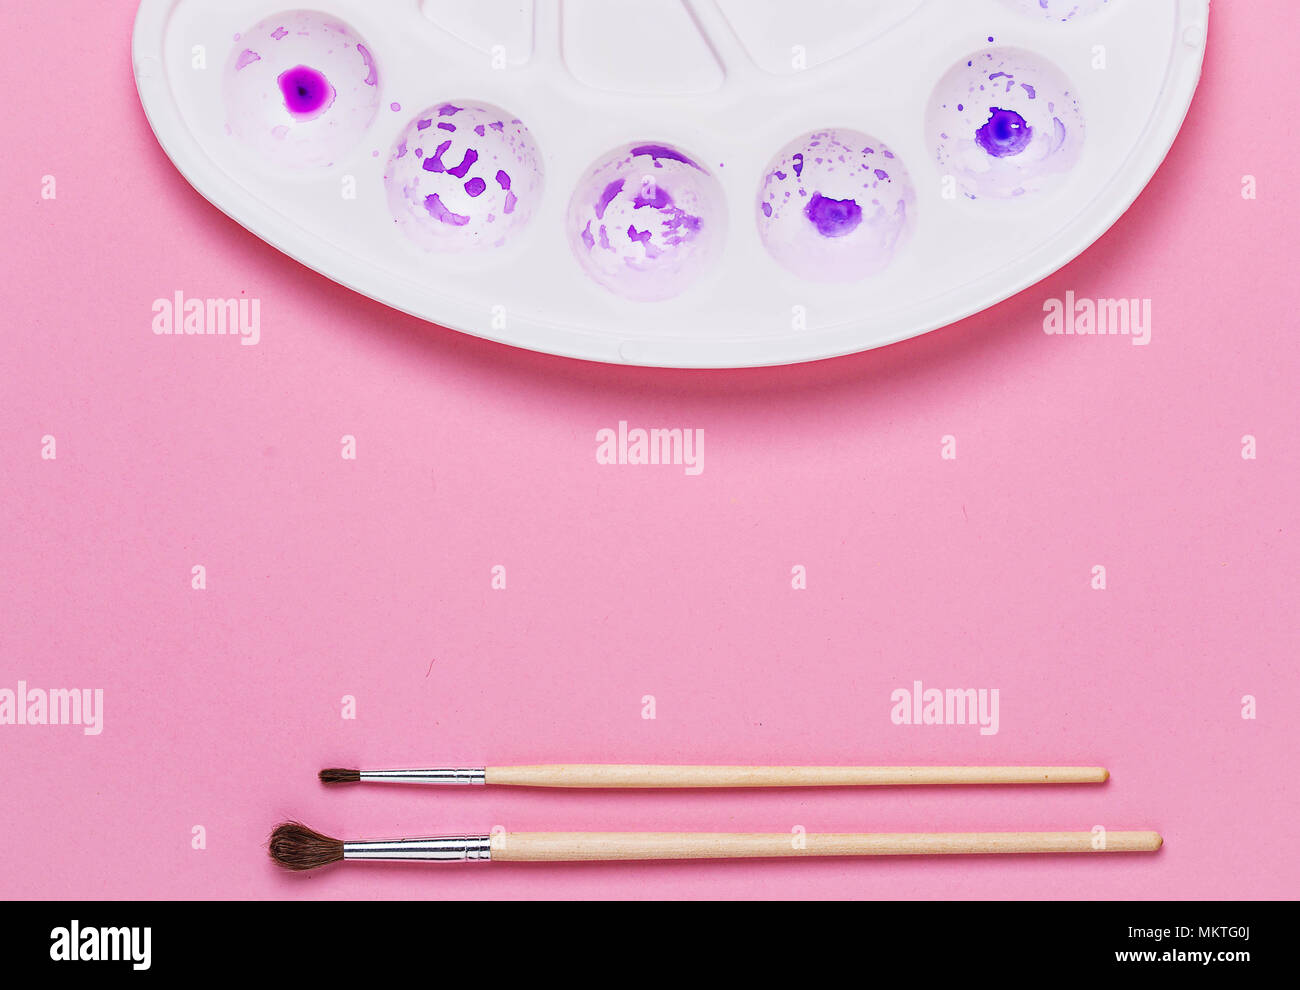 Artist€™s palette with purple and violet paint and brushes on pink background Stock Photo